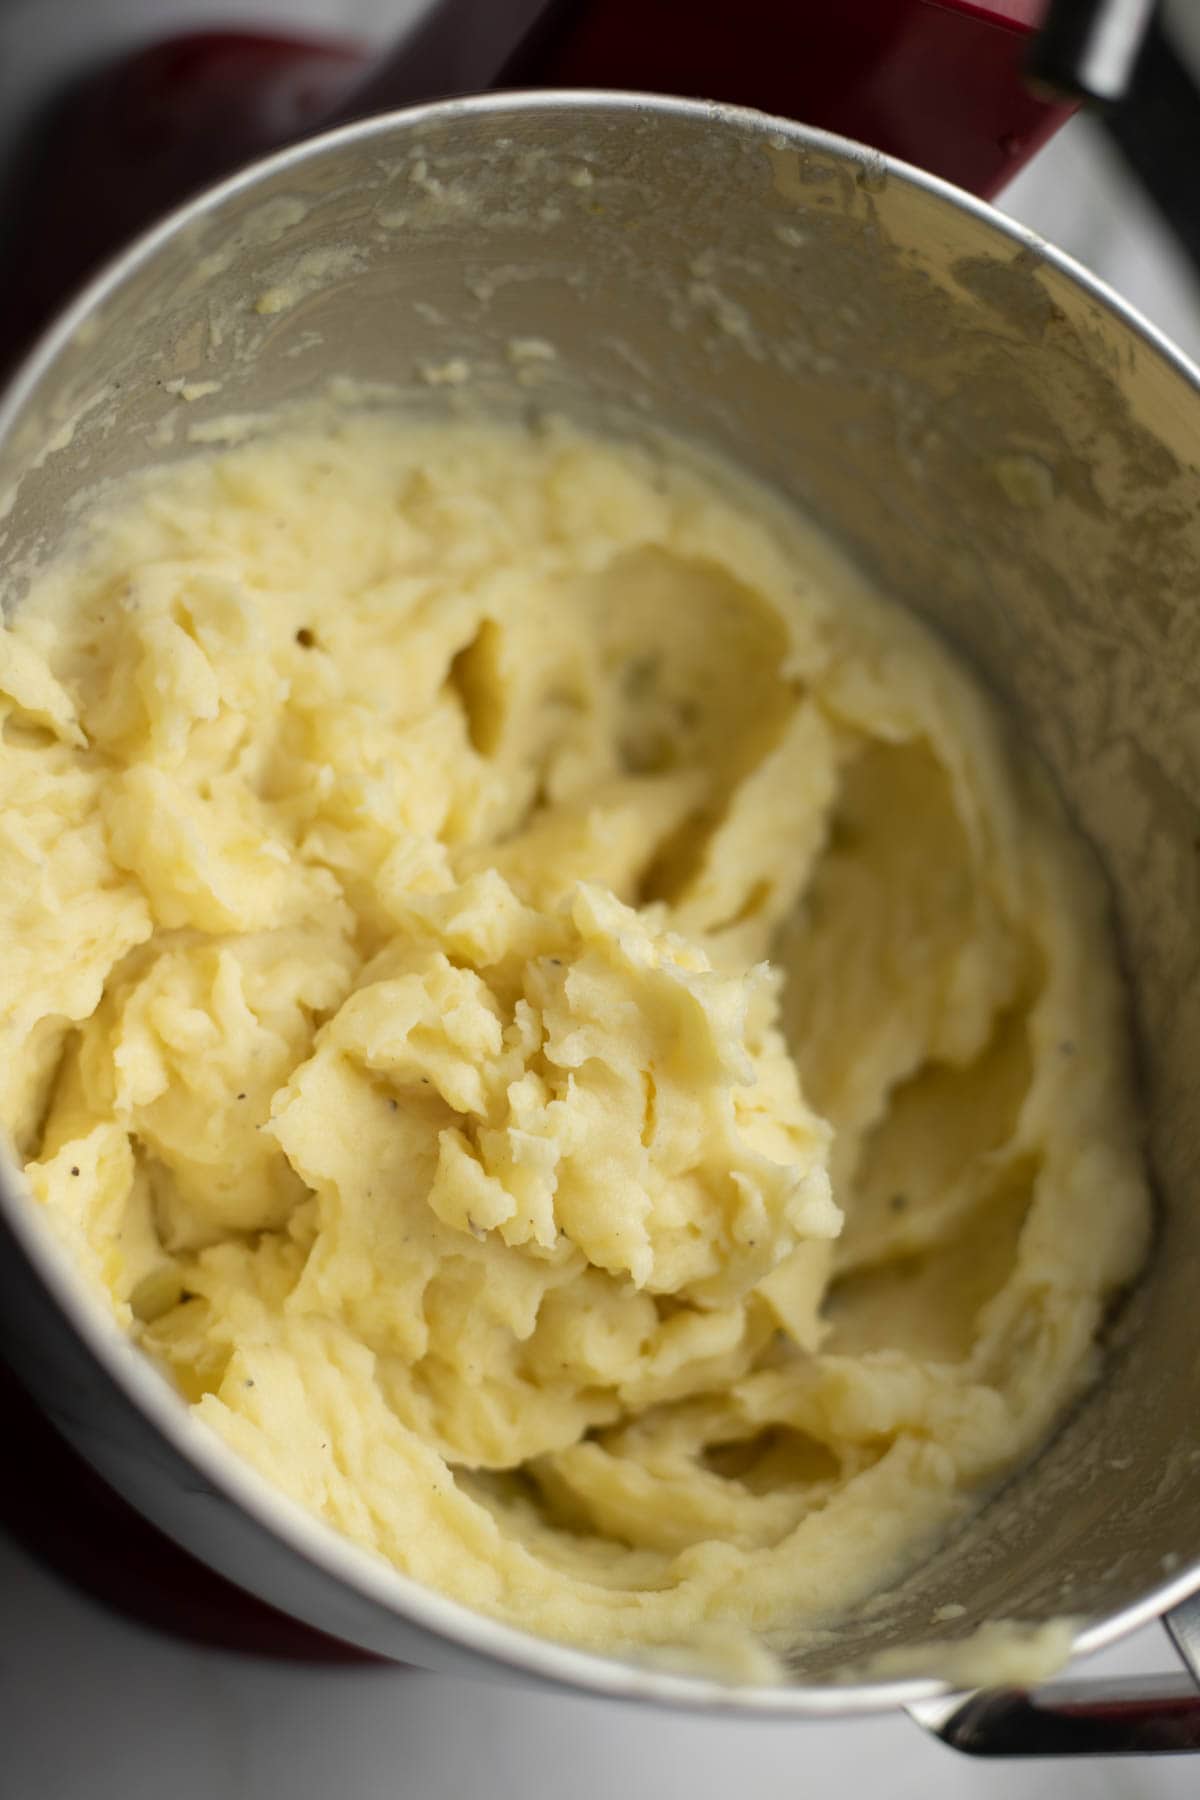 https://www.lexasrecipes.com/wp-content/uploads/2022/01/Instructions-for-KitchenAid-for-Mashed-Potatoes-Step-1-1800px-8.jpg